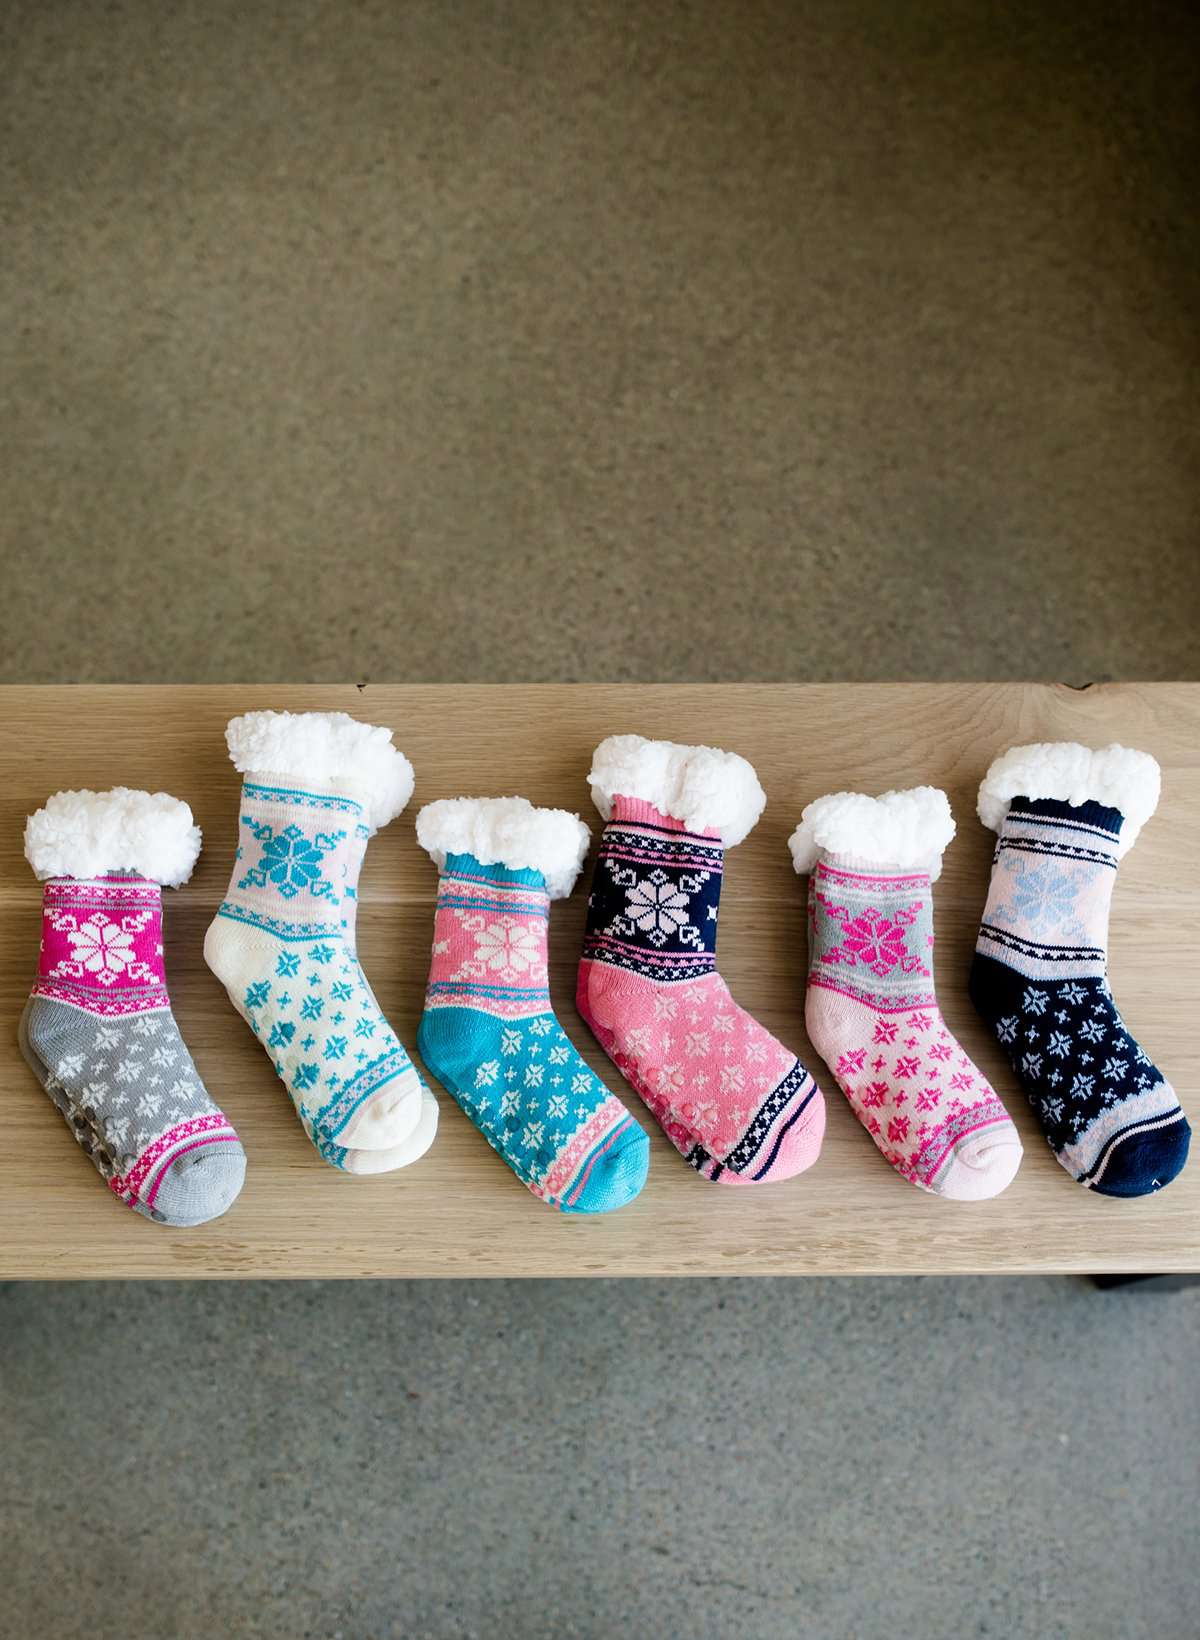 Snowflake slipper socks with skid proof bottoms. The come in blush, blue, cream, navy, pink and gray.